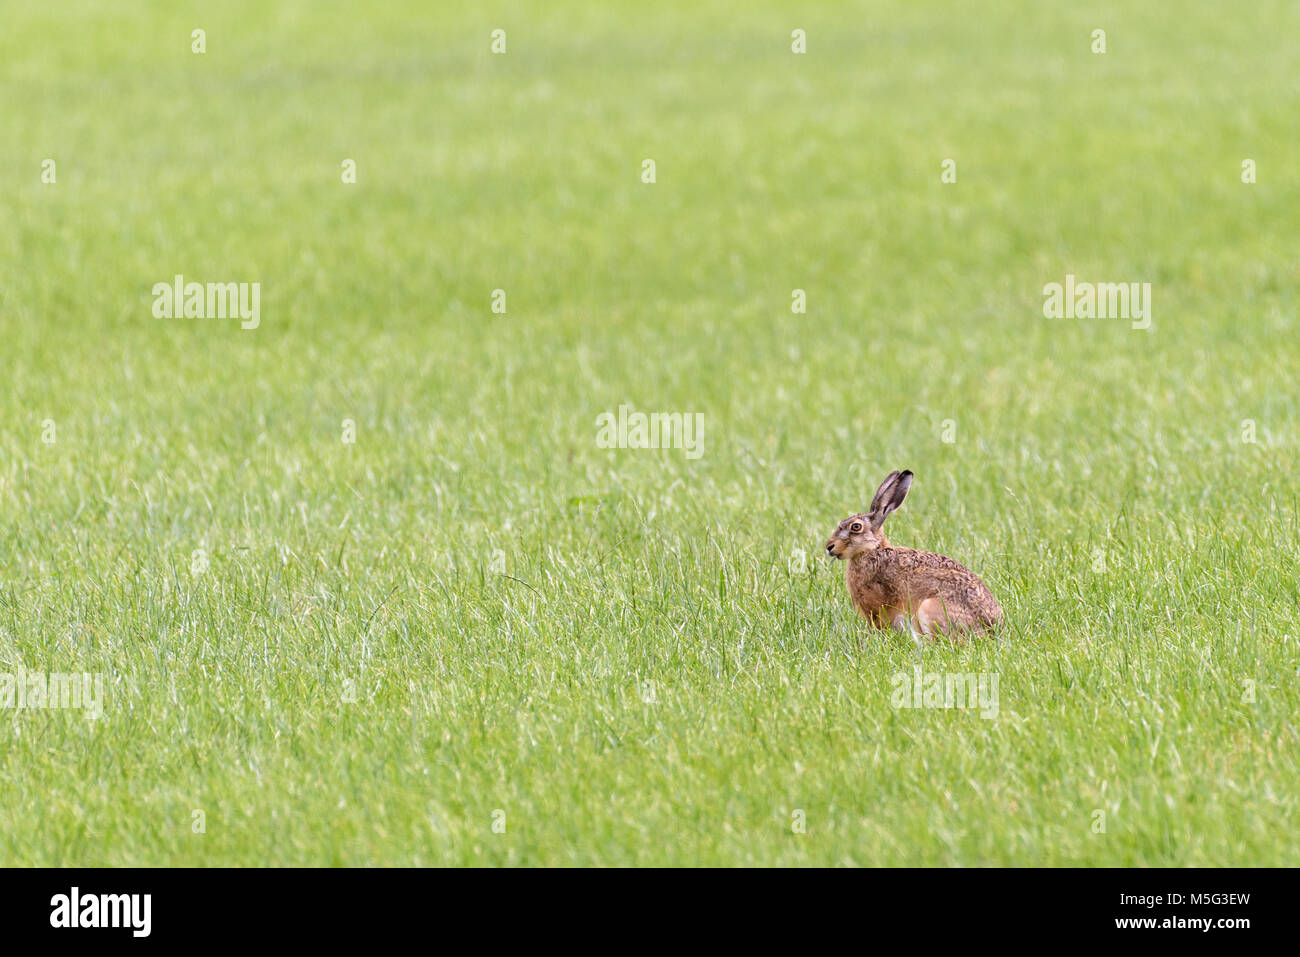 A european hare is sitting in an open field and is eating from the grass. Stock Photo